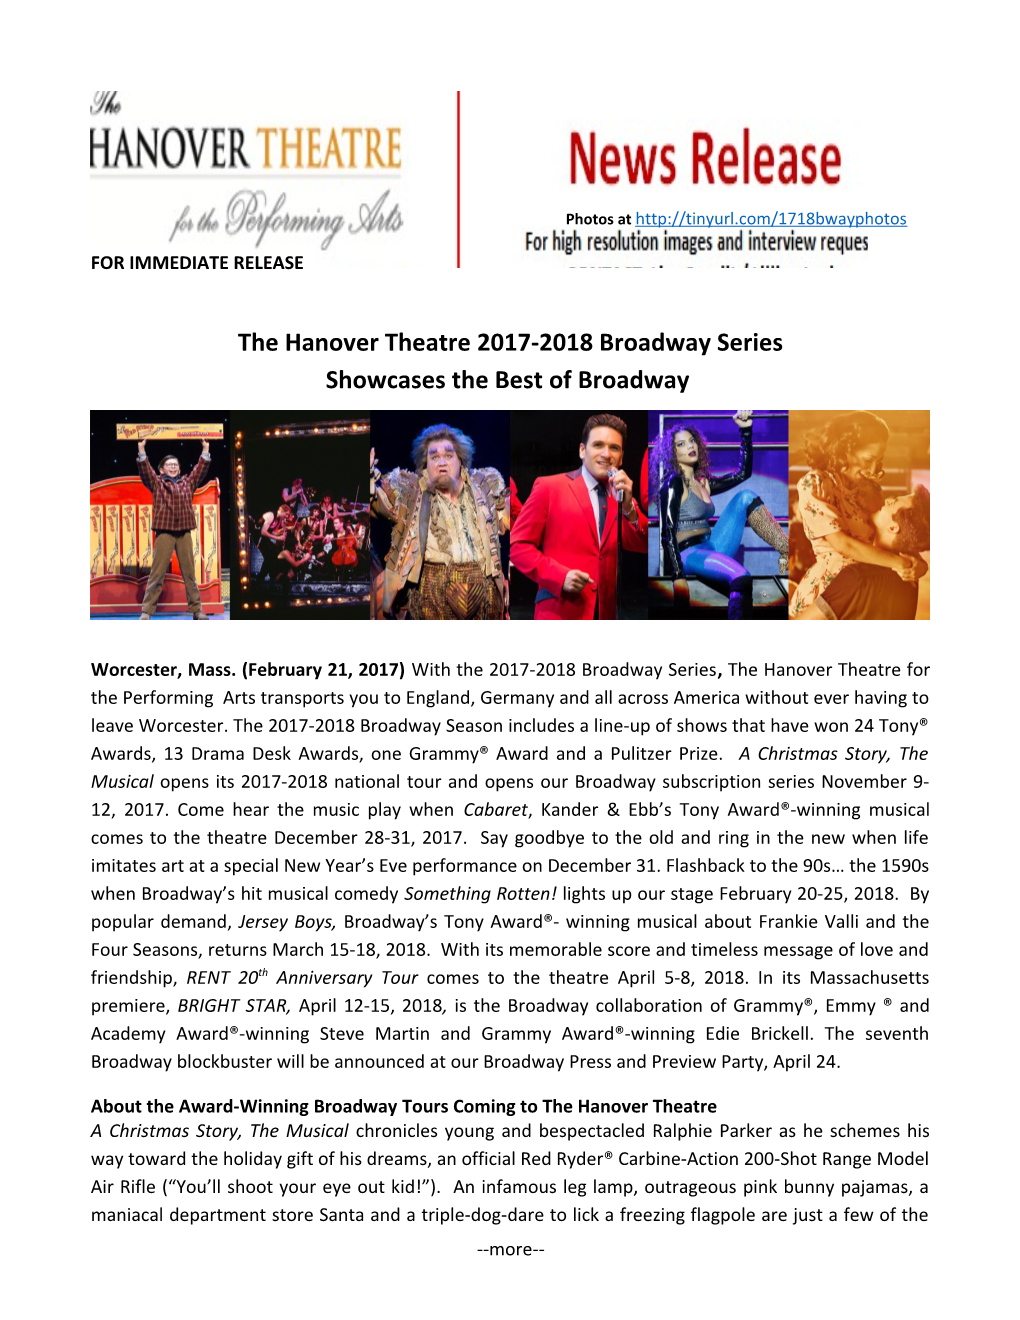 The Hanover Theatre2017-2018 Broadway Series Showcasesthe Best of Broadway